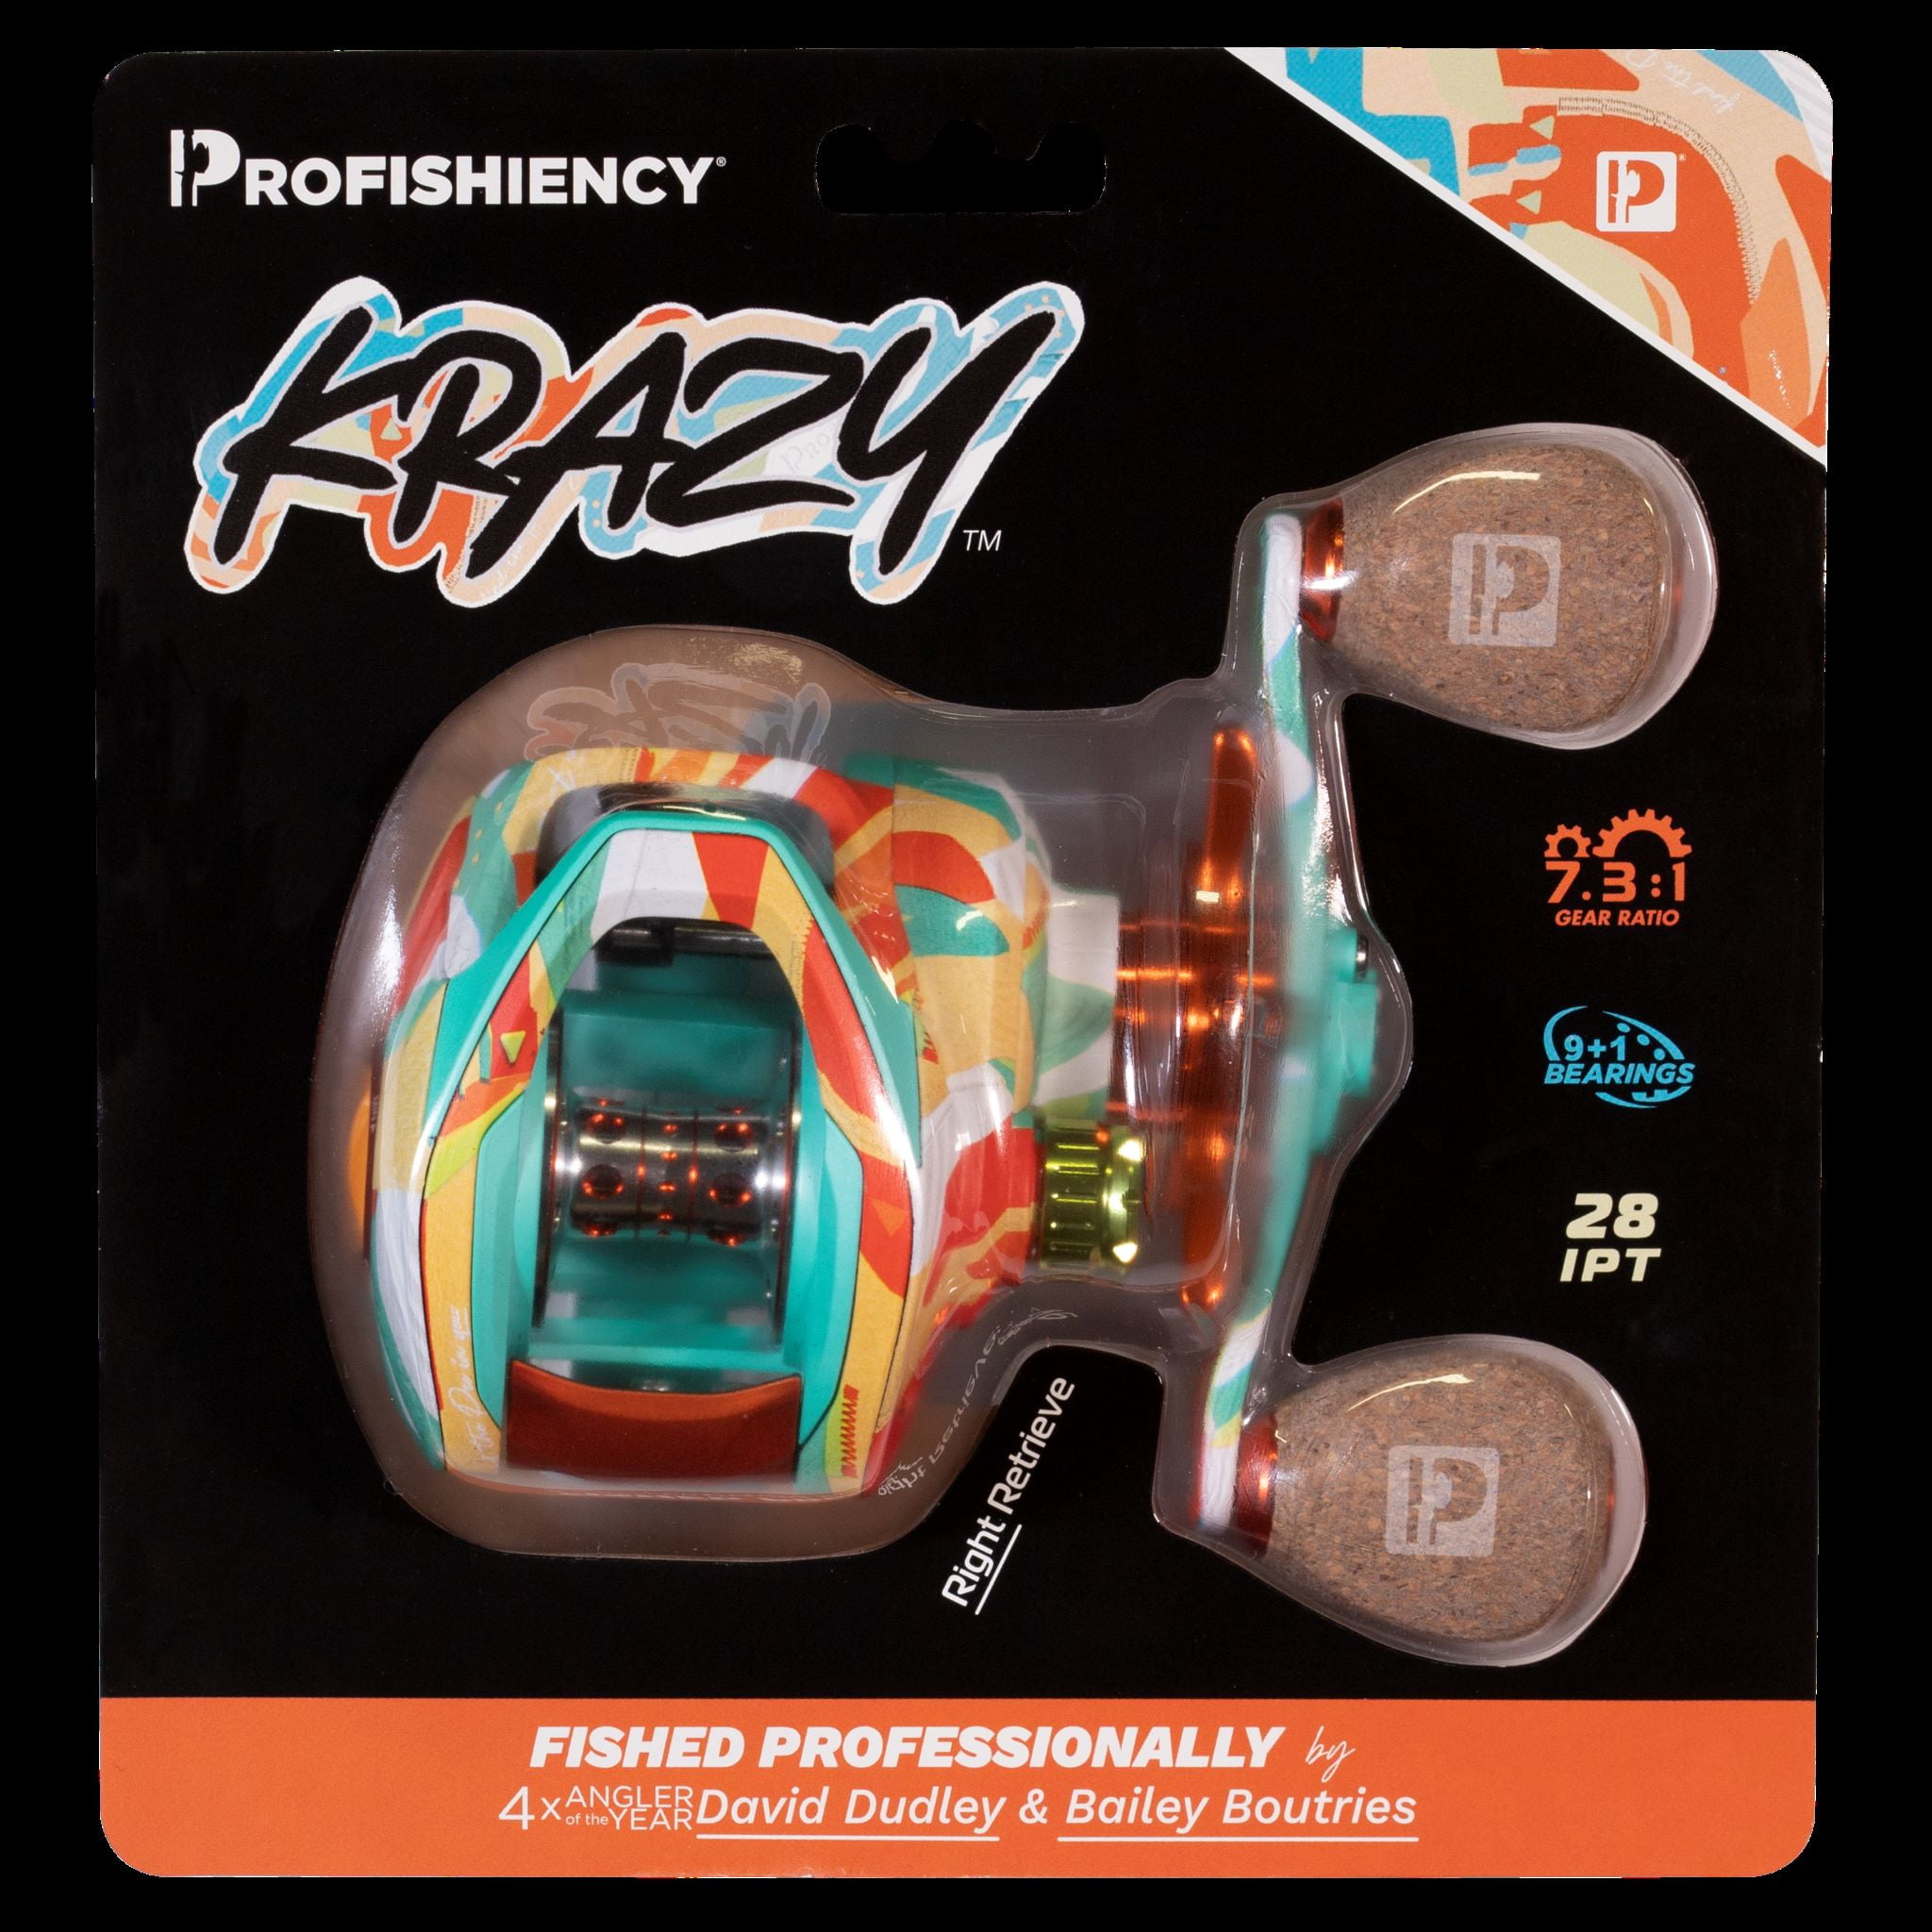 ProFISHiency KRAZY Pro Series Baitcast Reel and Casting Combos Change the  Look of Fishing - Fishing Tackle Retailer - The Business Magazine of the  Sportfishing Industry